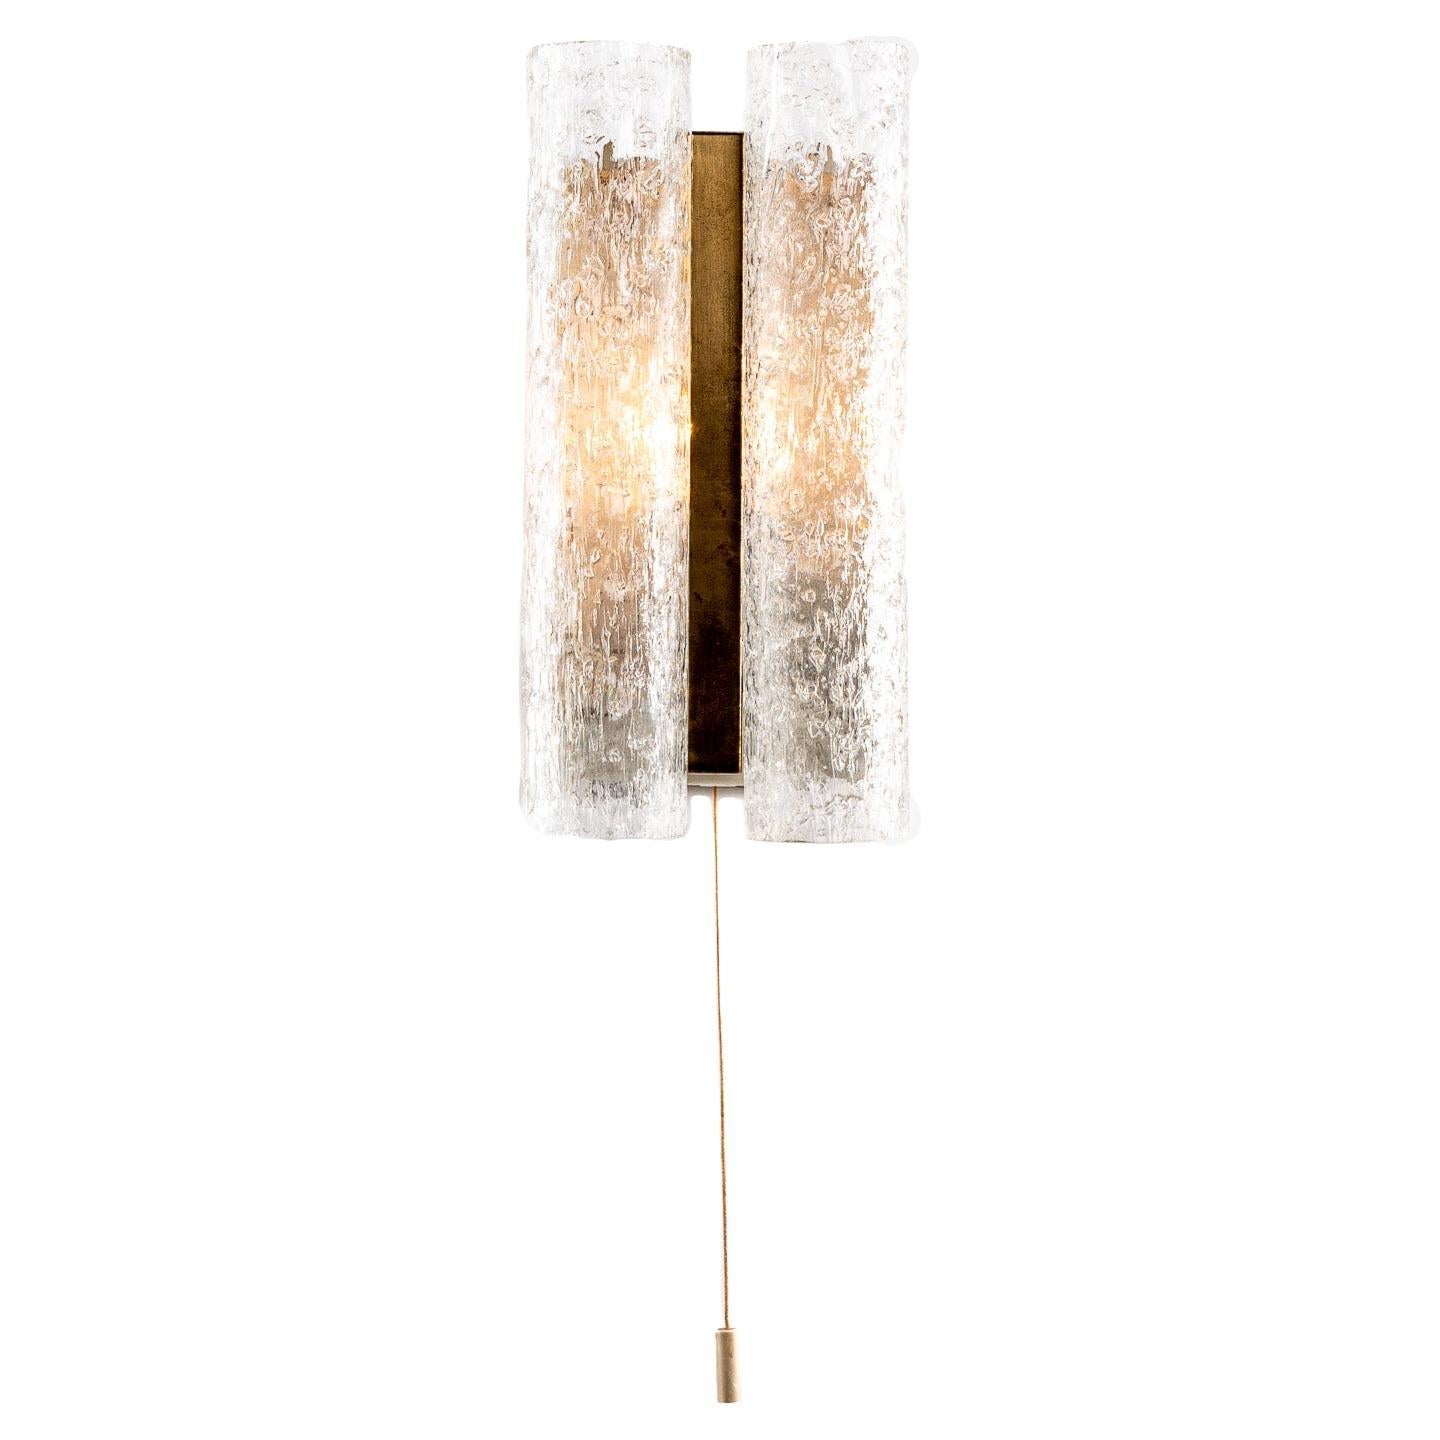 If you like vintage lighting then you will love this Doria glass sconce. Designed with two vertical tubes astride brass plates and metal centre-plate, it's a highly distinctive piece and looks stunning when illuminated. Recently fitted new wiring